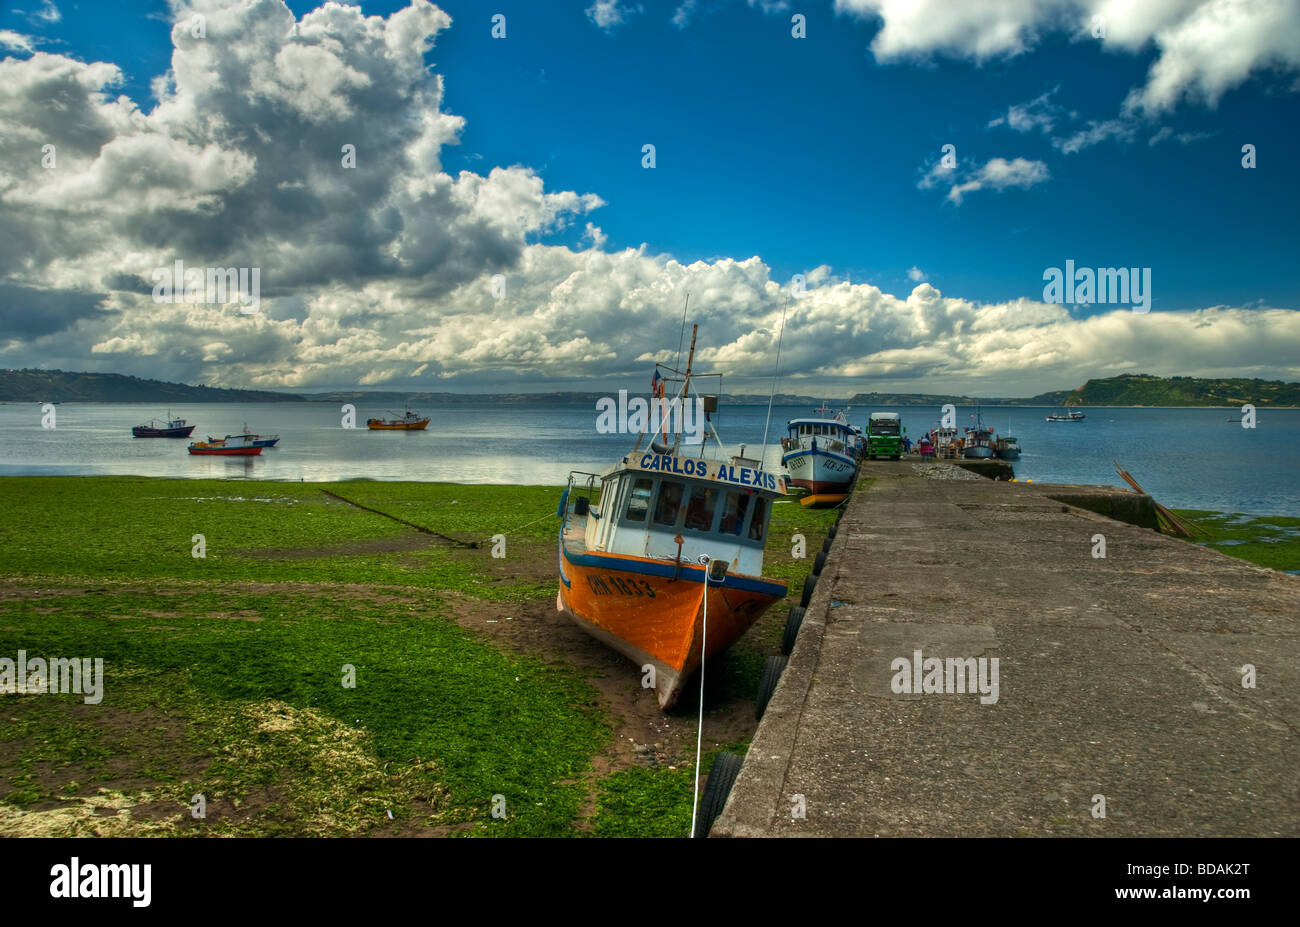 Pictures of Chiles Southern Regions, Chiloe, the biggest Island in Chile. City Achao Stock Photo